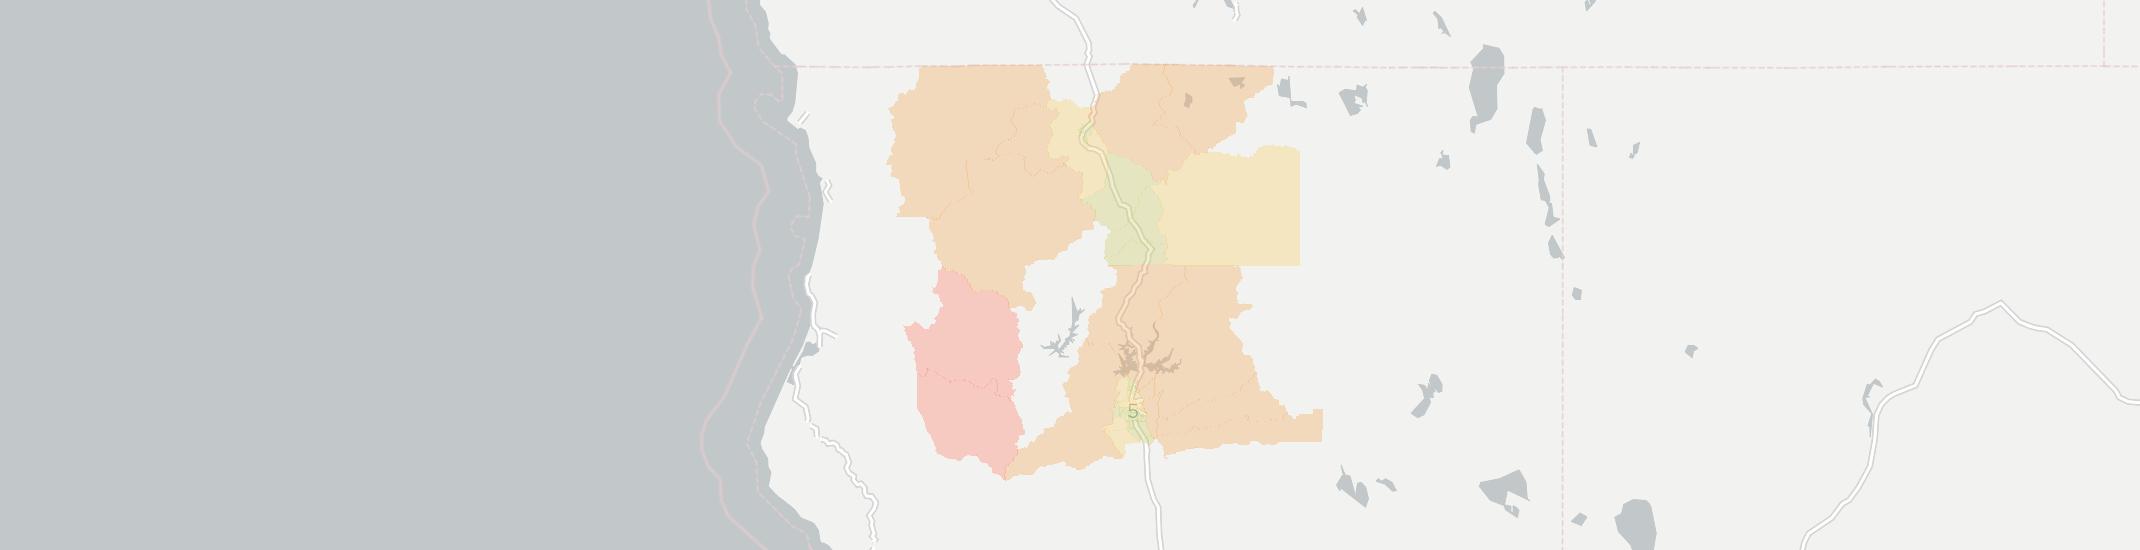 Redding Internet Competition Map. Click for interactive map.